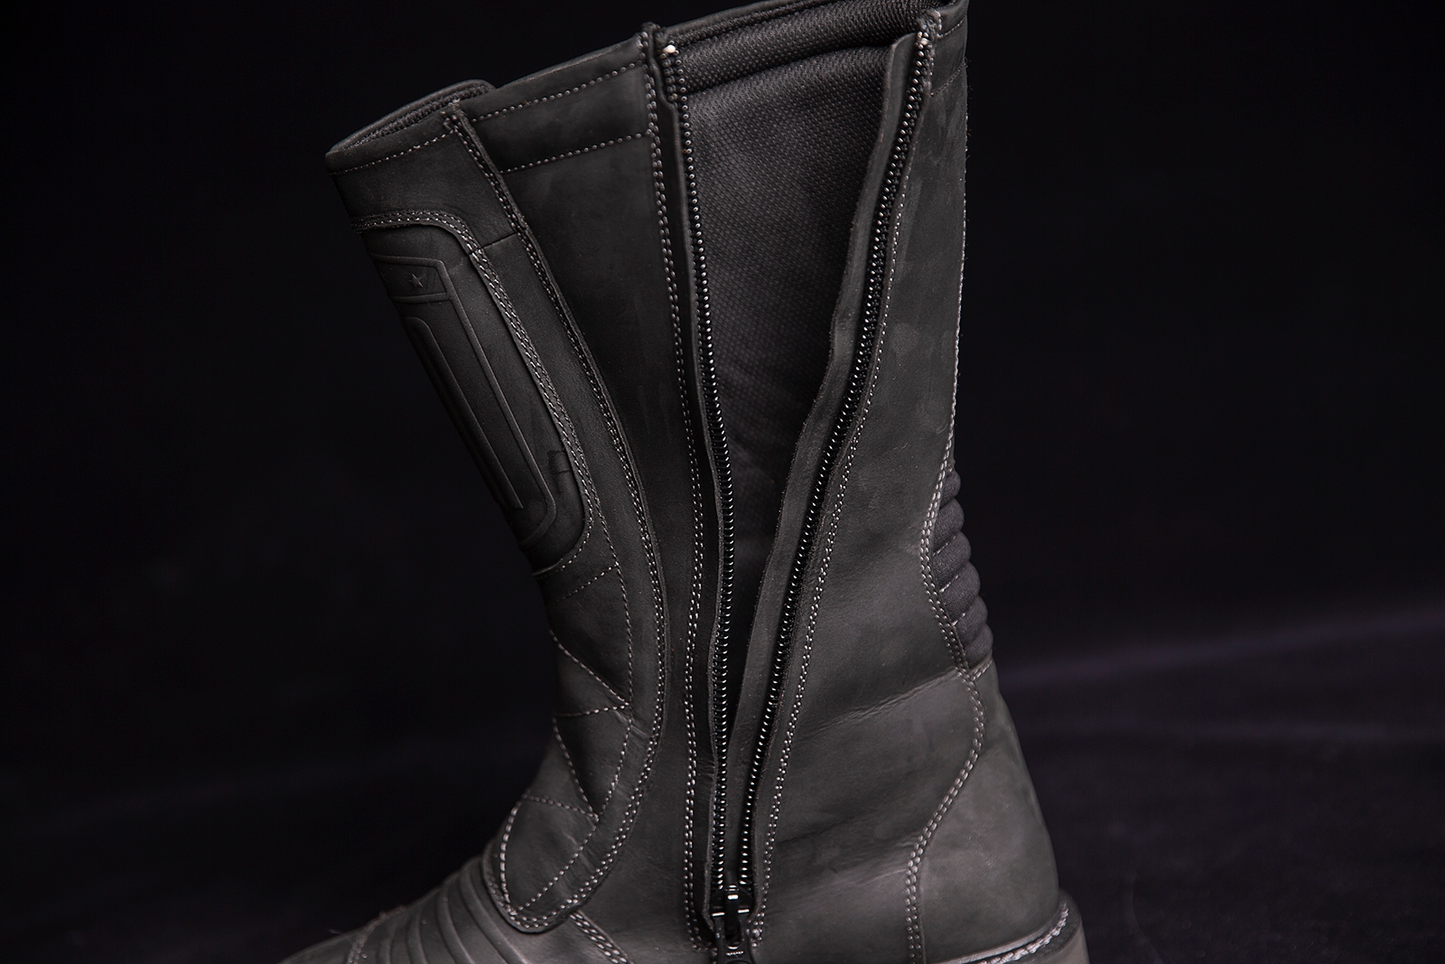 ICON Elsinore 2™ CE Boots - Black - Size 10.5 3403-1214